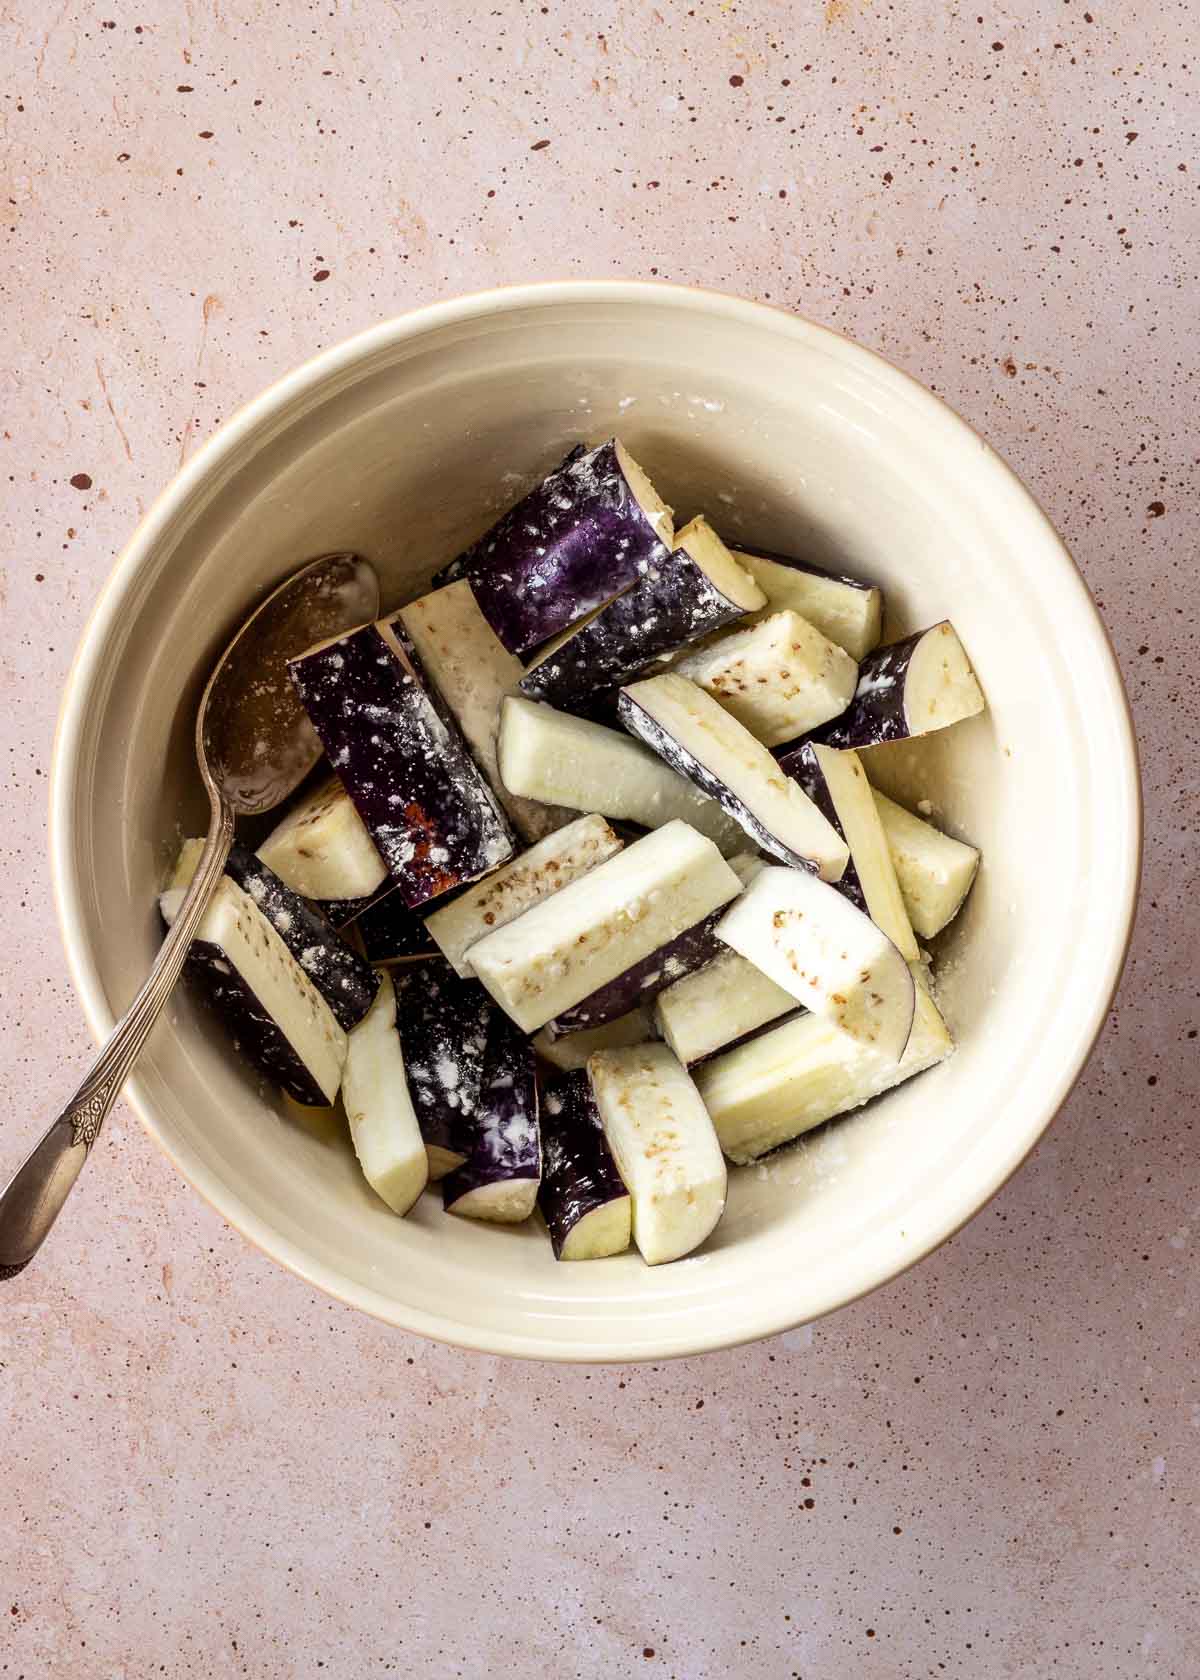 A large white bowl of eggplant slices being mixed with cornstarch.